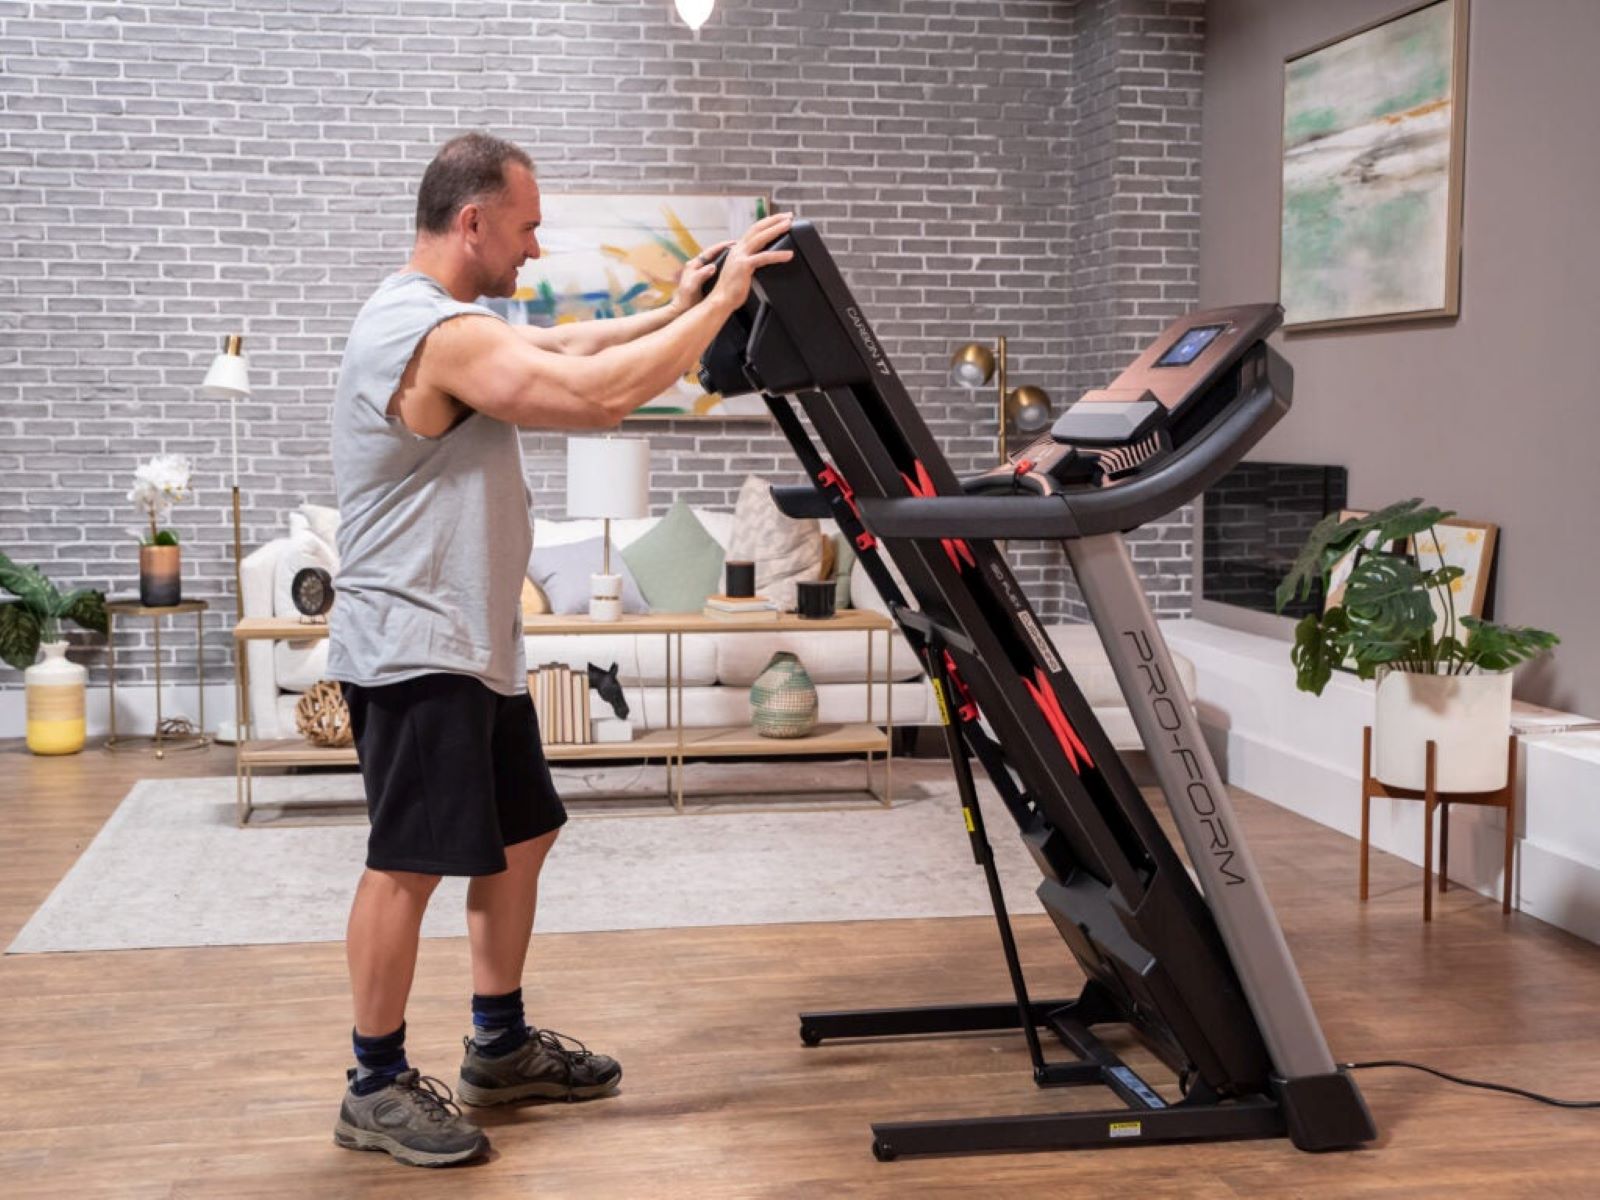 How To Move A Treadmill